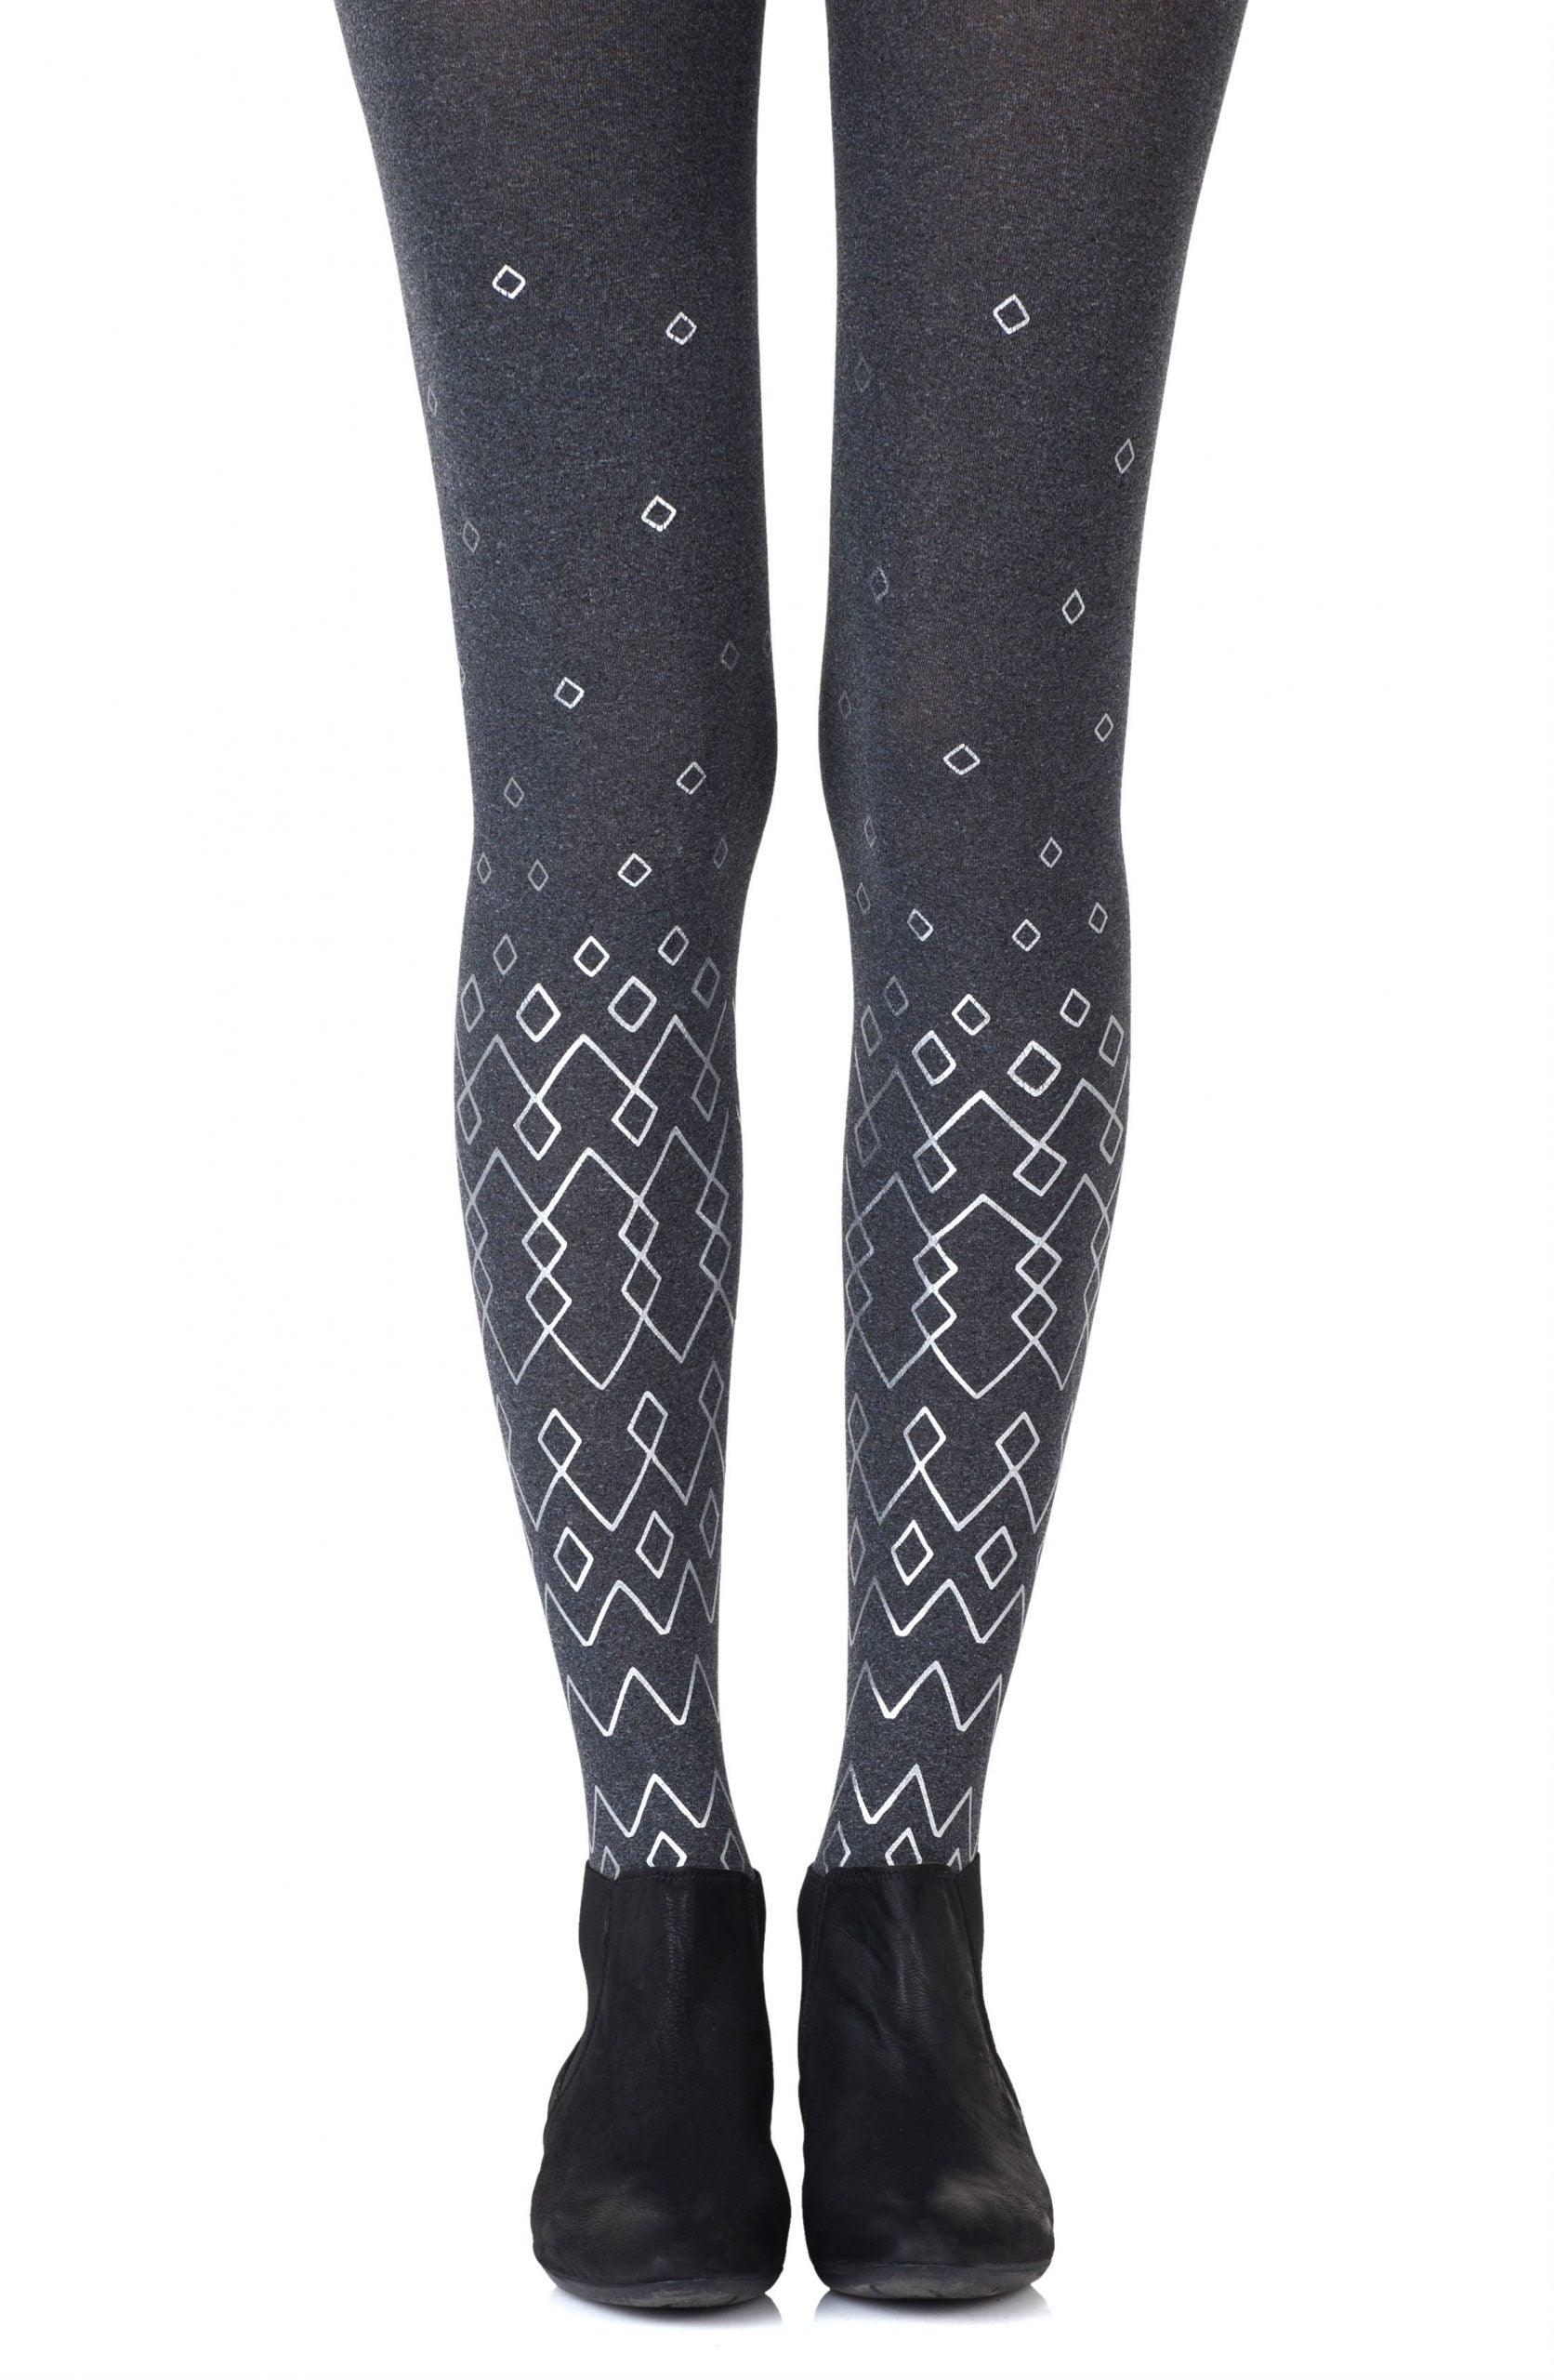 Zohara "Diamonds Are Forever" Heather Grey Tights - Sydney Rose Lingerie 